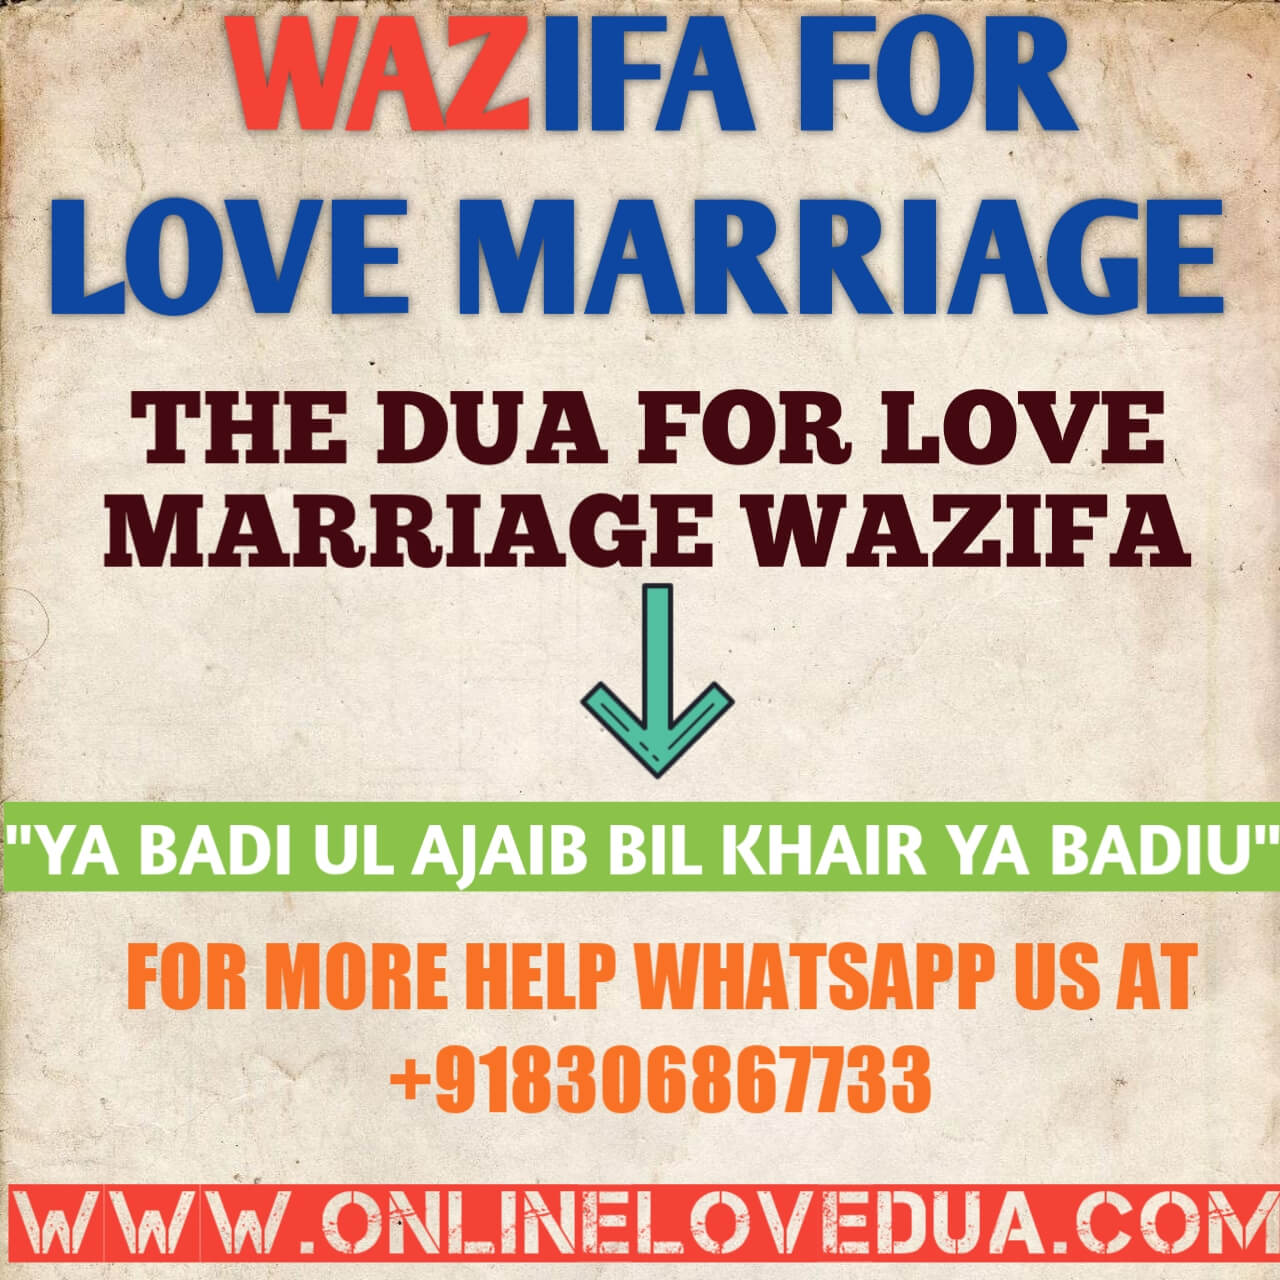 can a wazifa be done without permission